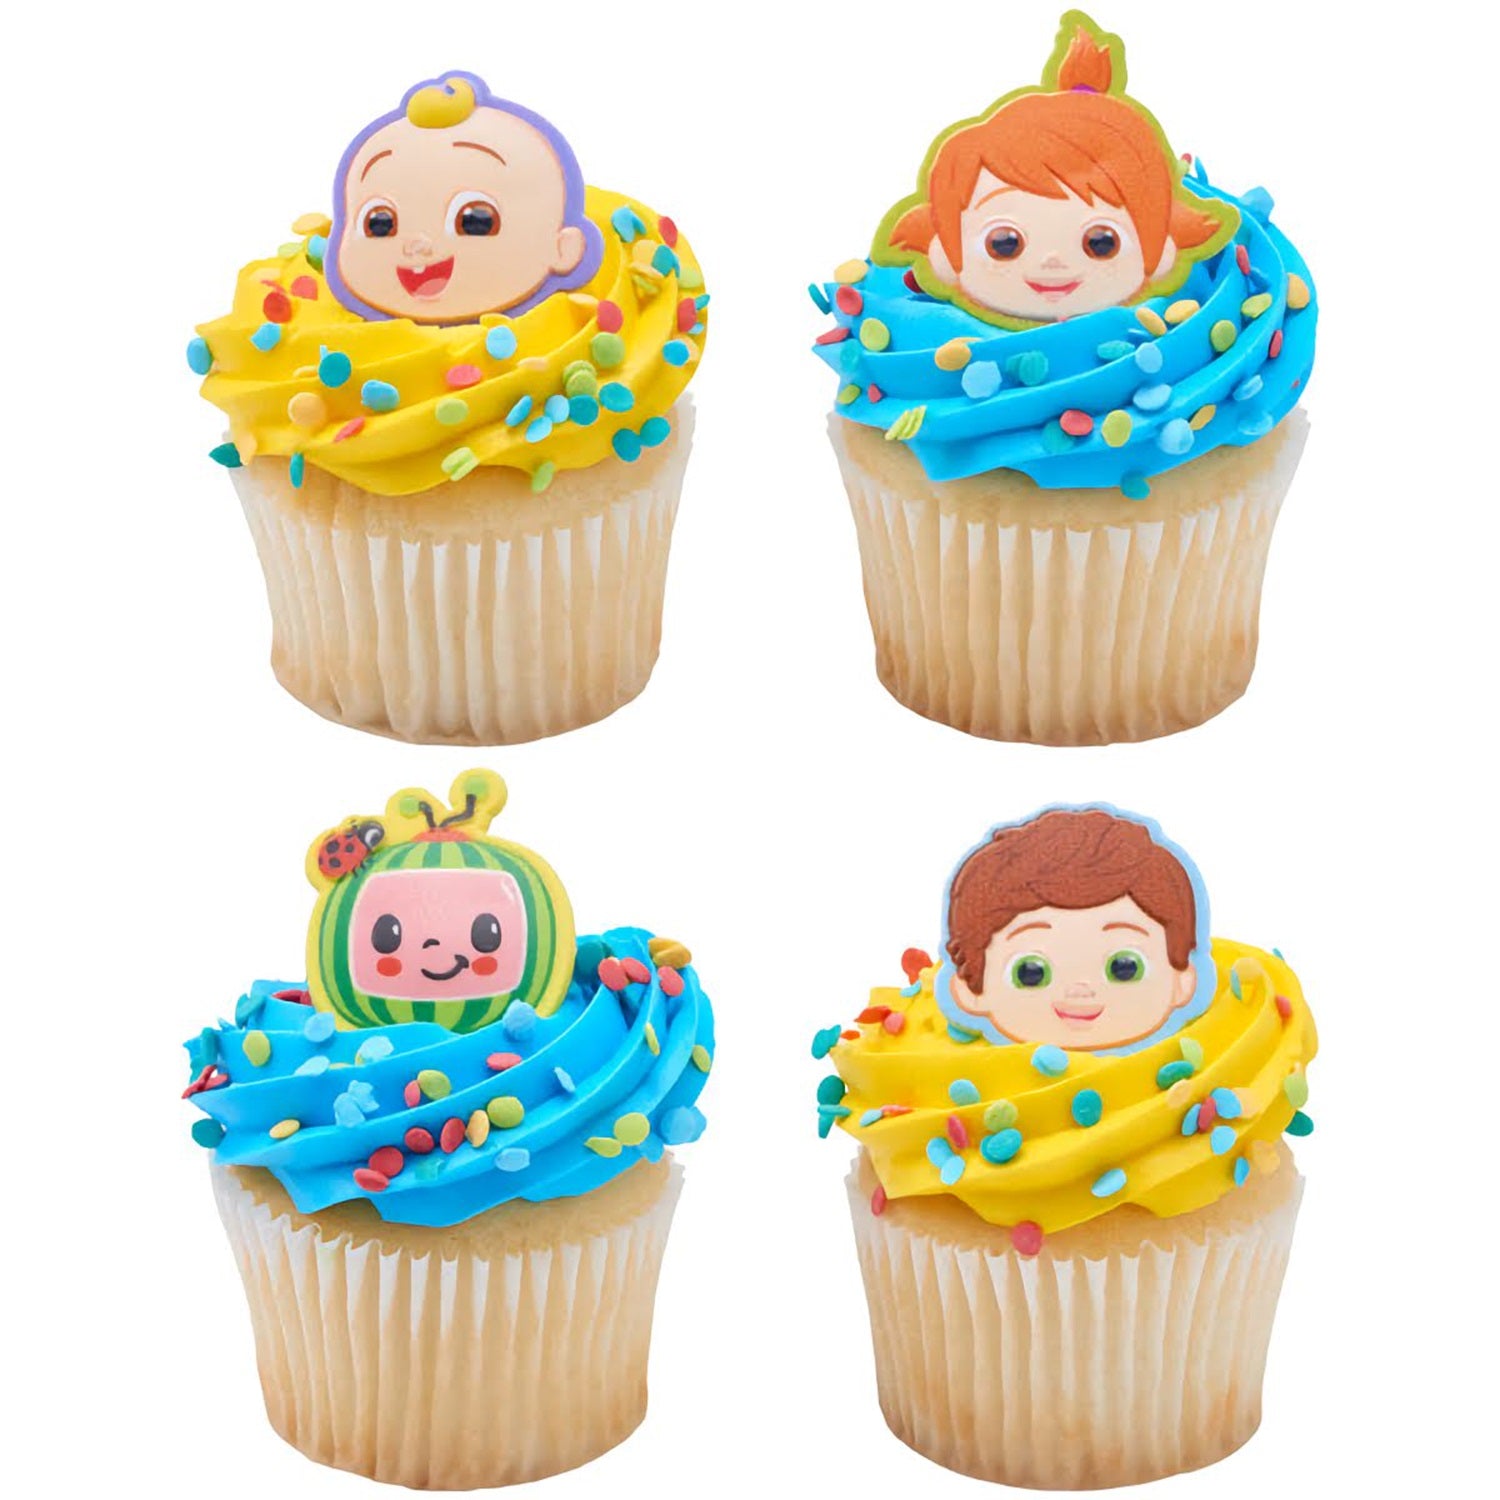 Assorted Cocomelon character cupcake rings atop colorful frosted cupcakes, perfect for themed birthday parties and children's bakery accessories.